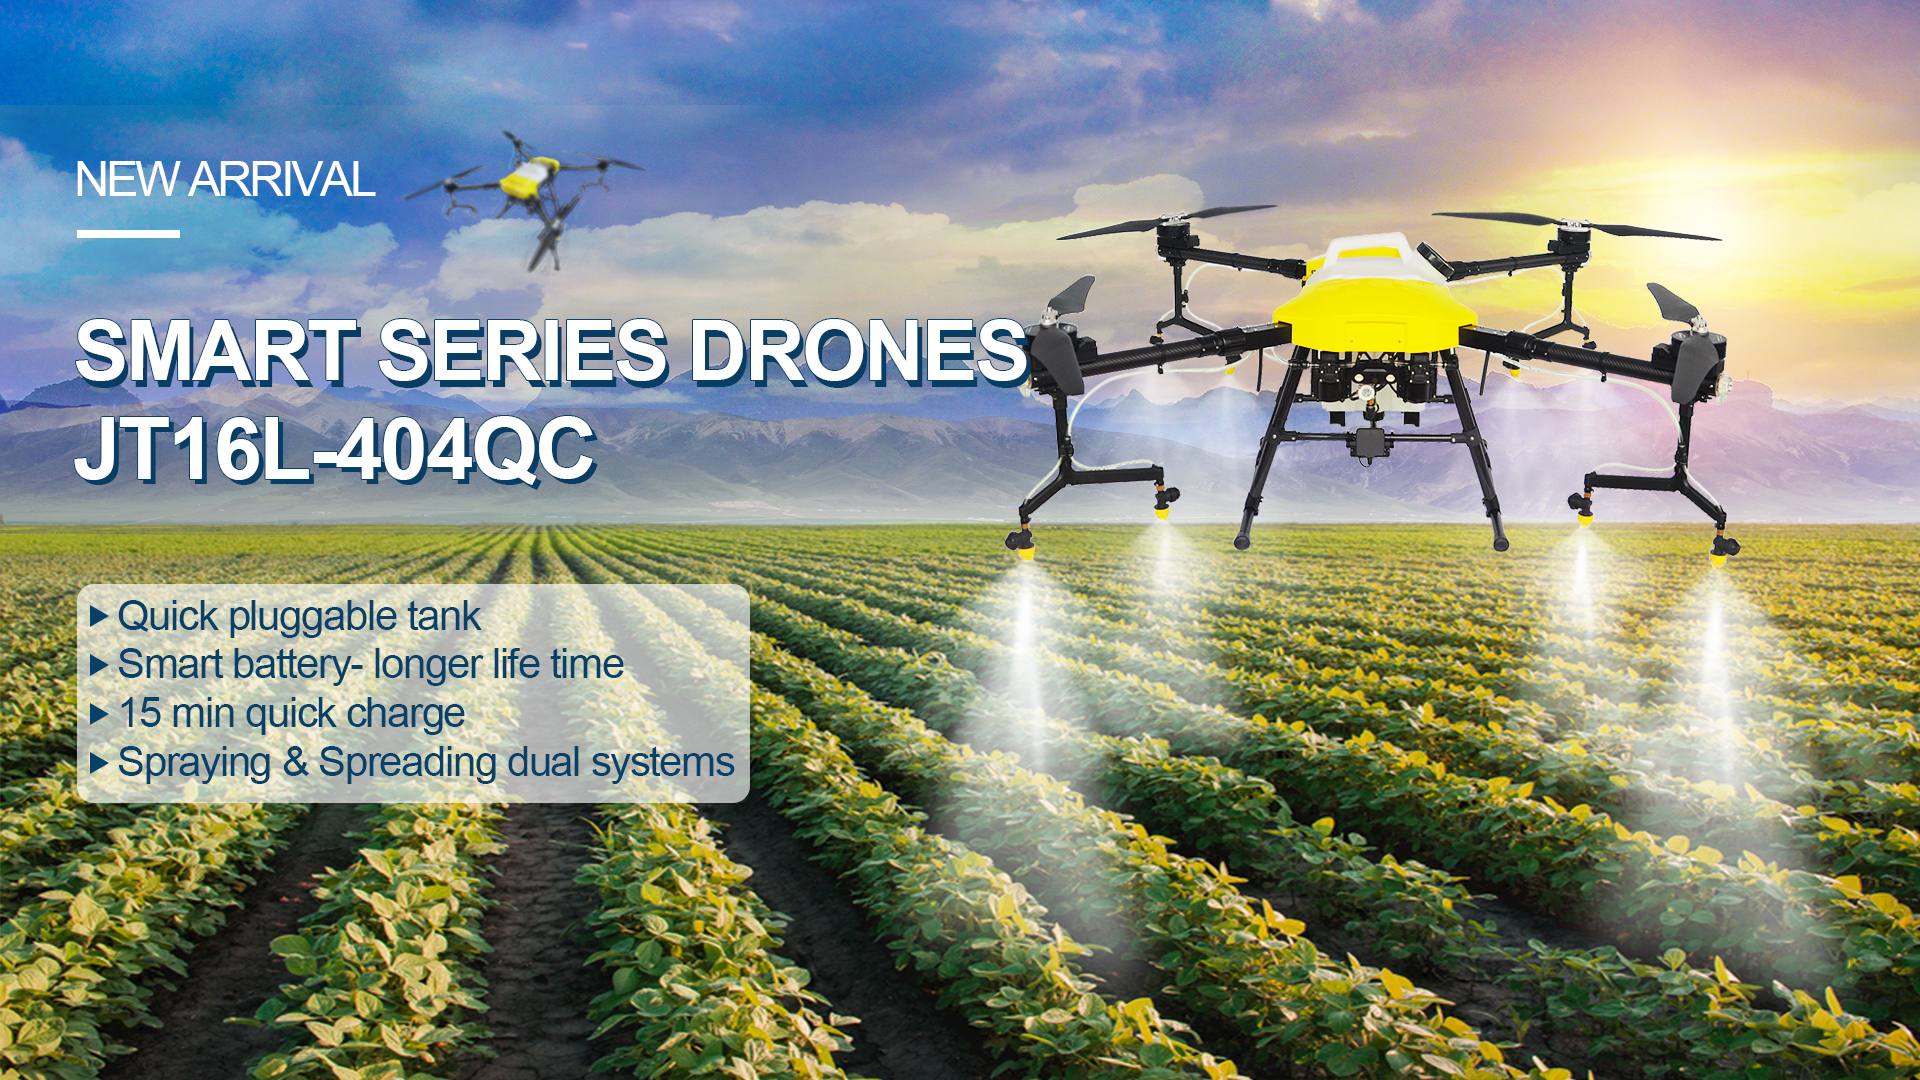 Agricultural sprayer drone safety operating procedures and precautions